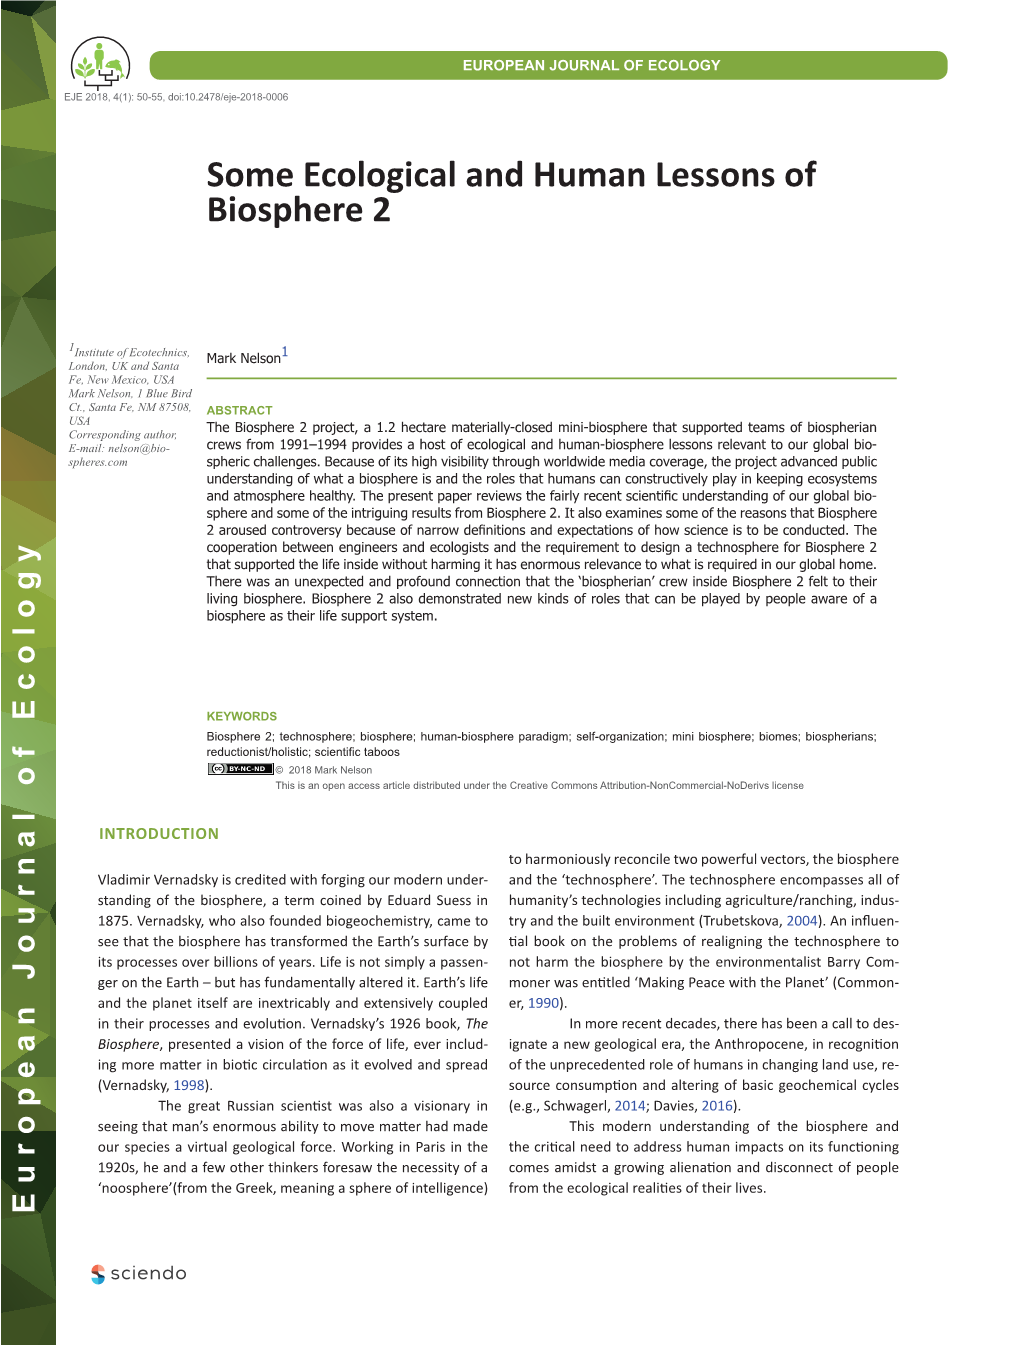 Some Ecological and Human Lessons of Biosphere 2